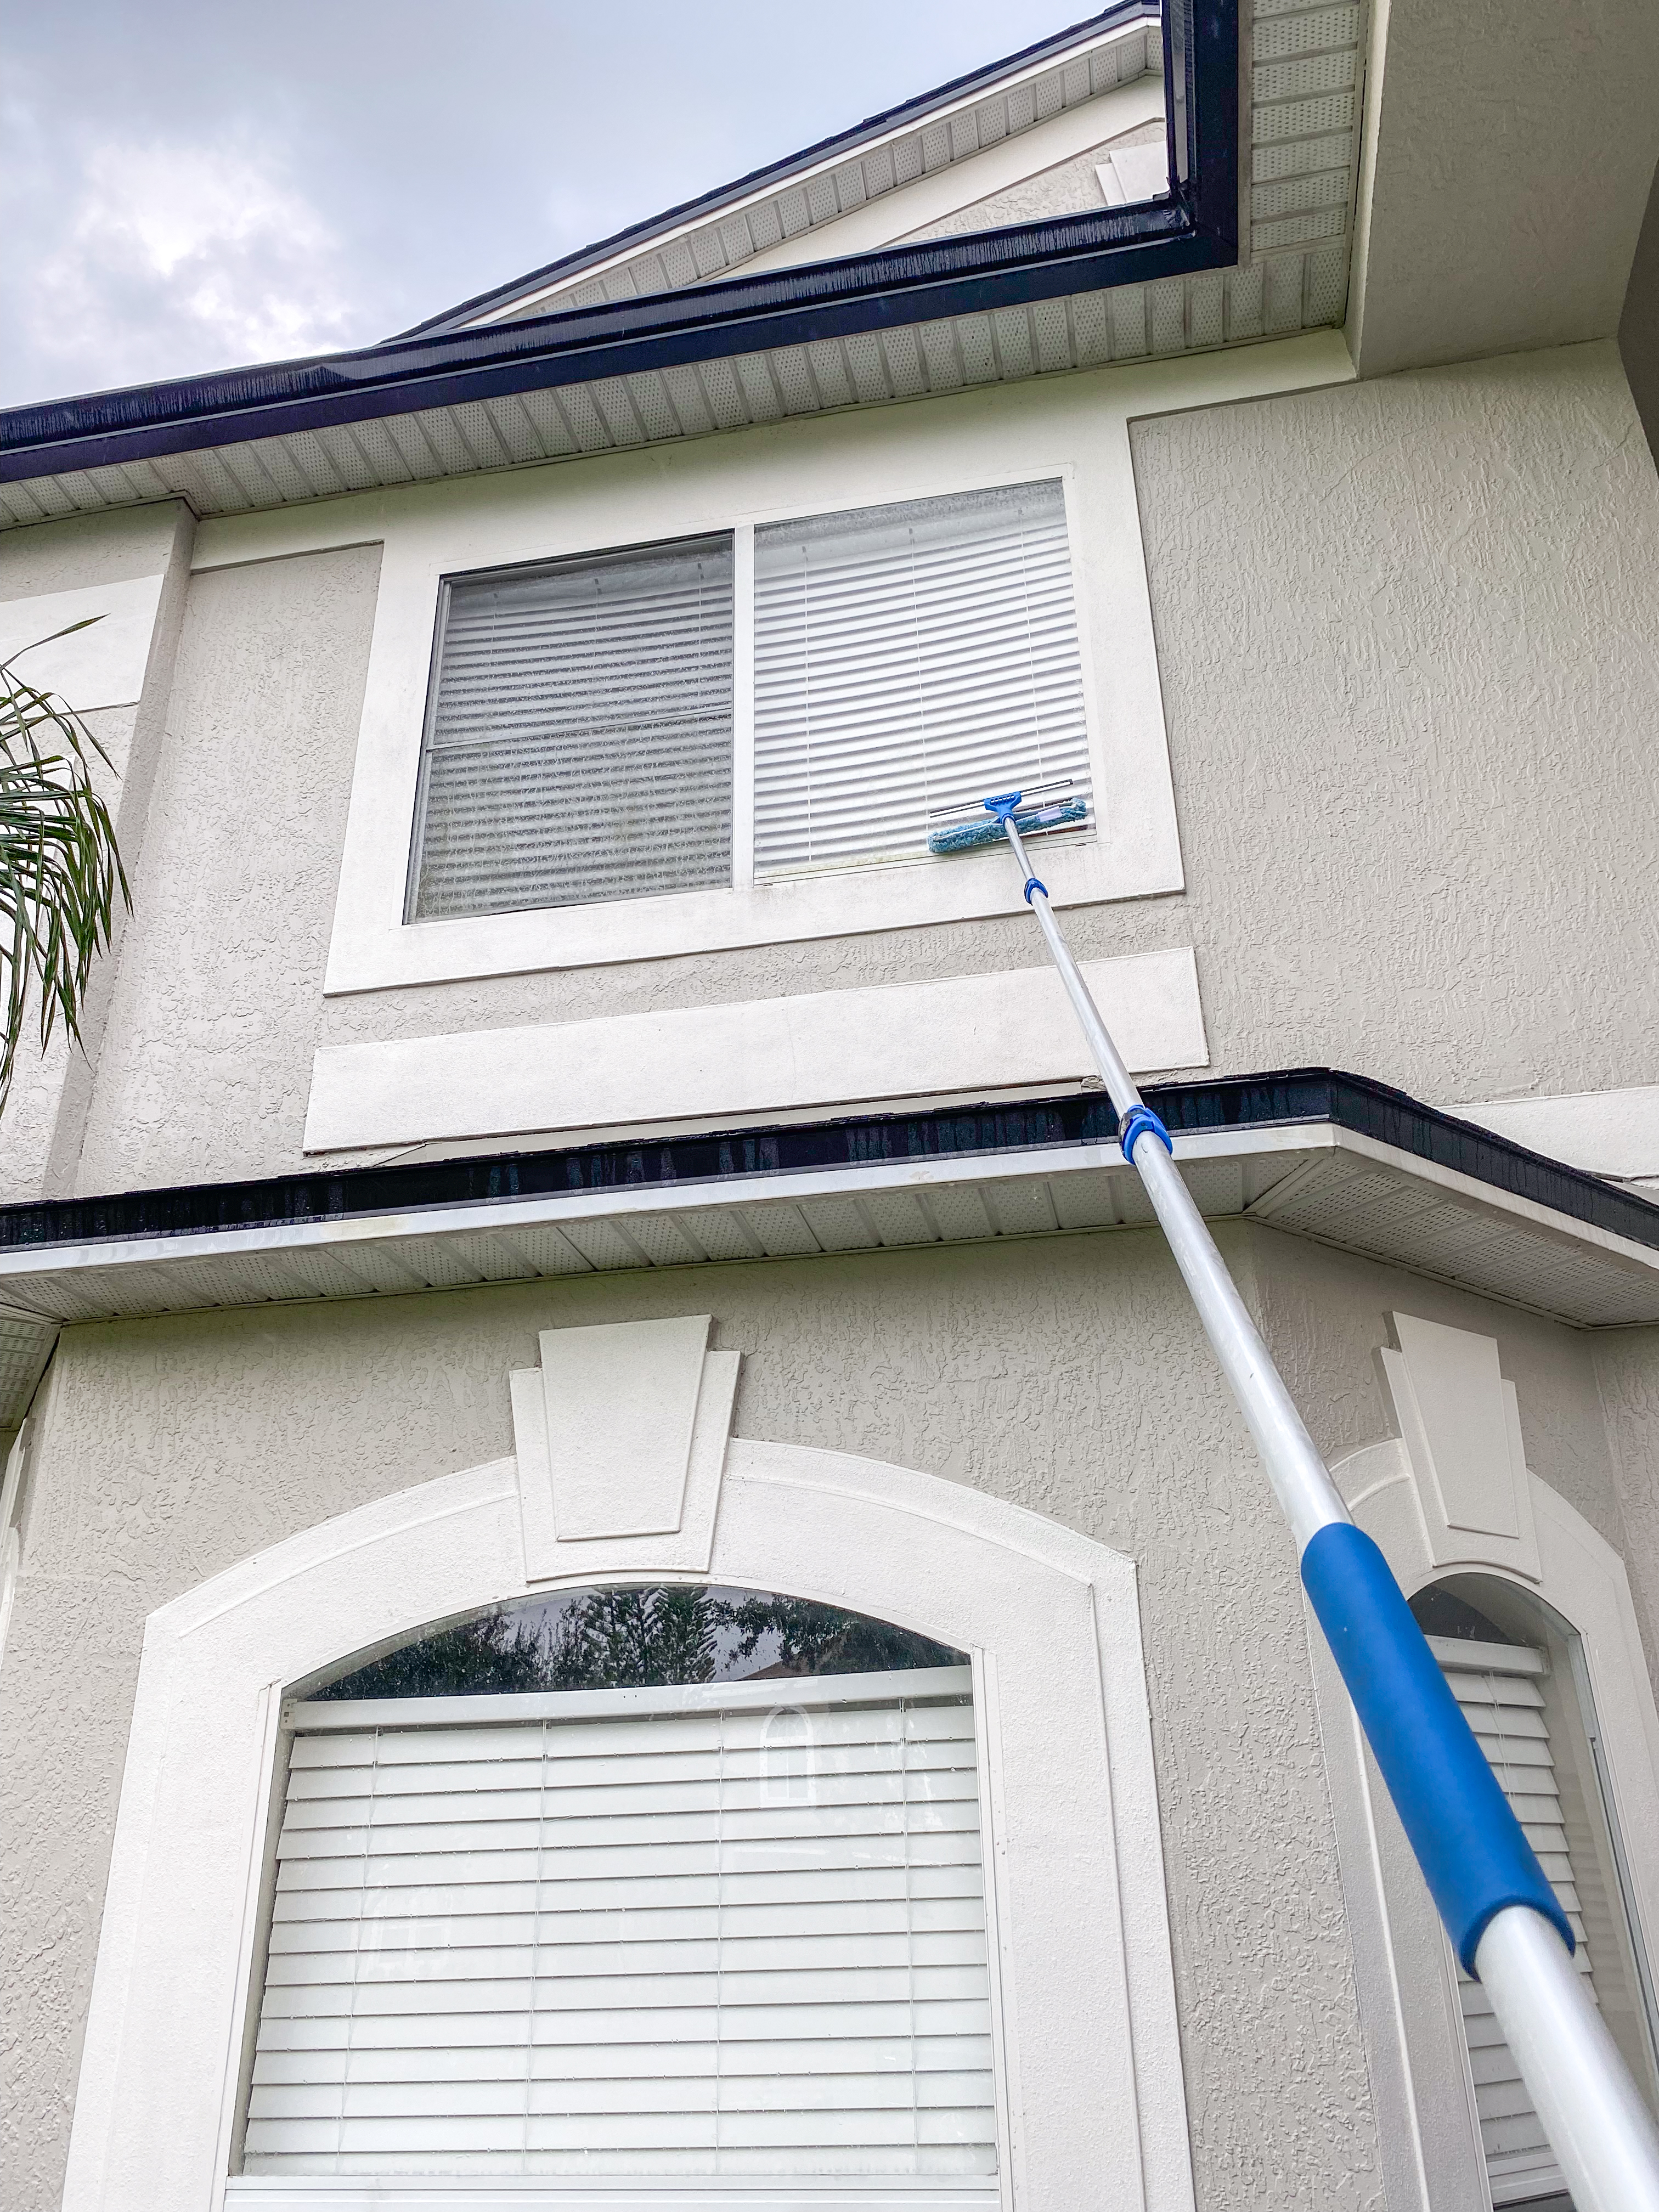 Crystal-Clear Windows in Orlando, FL: Our Expert Cleaning Service